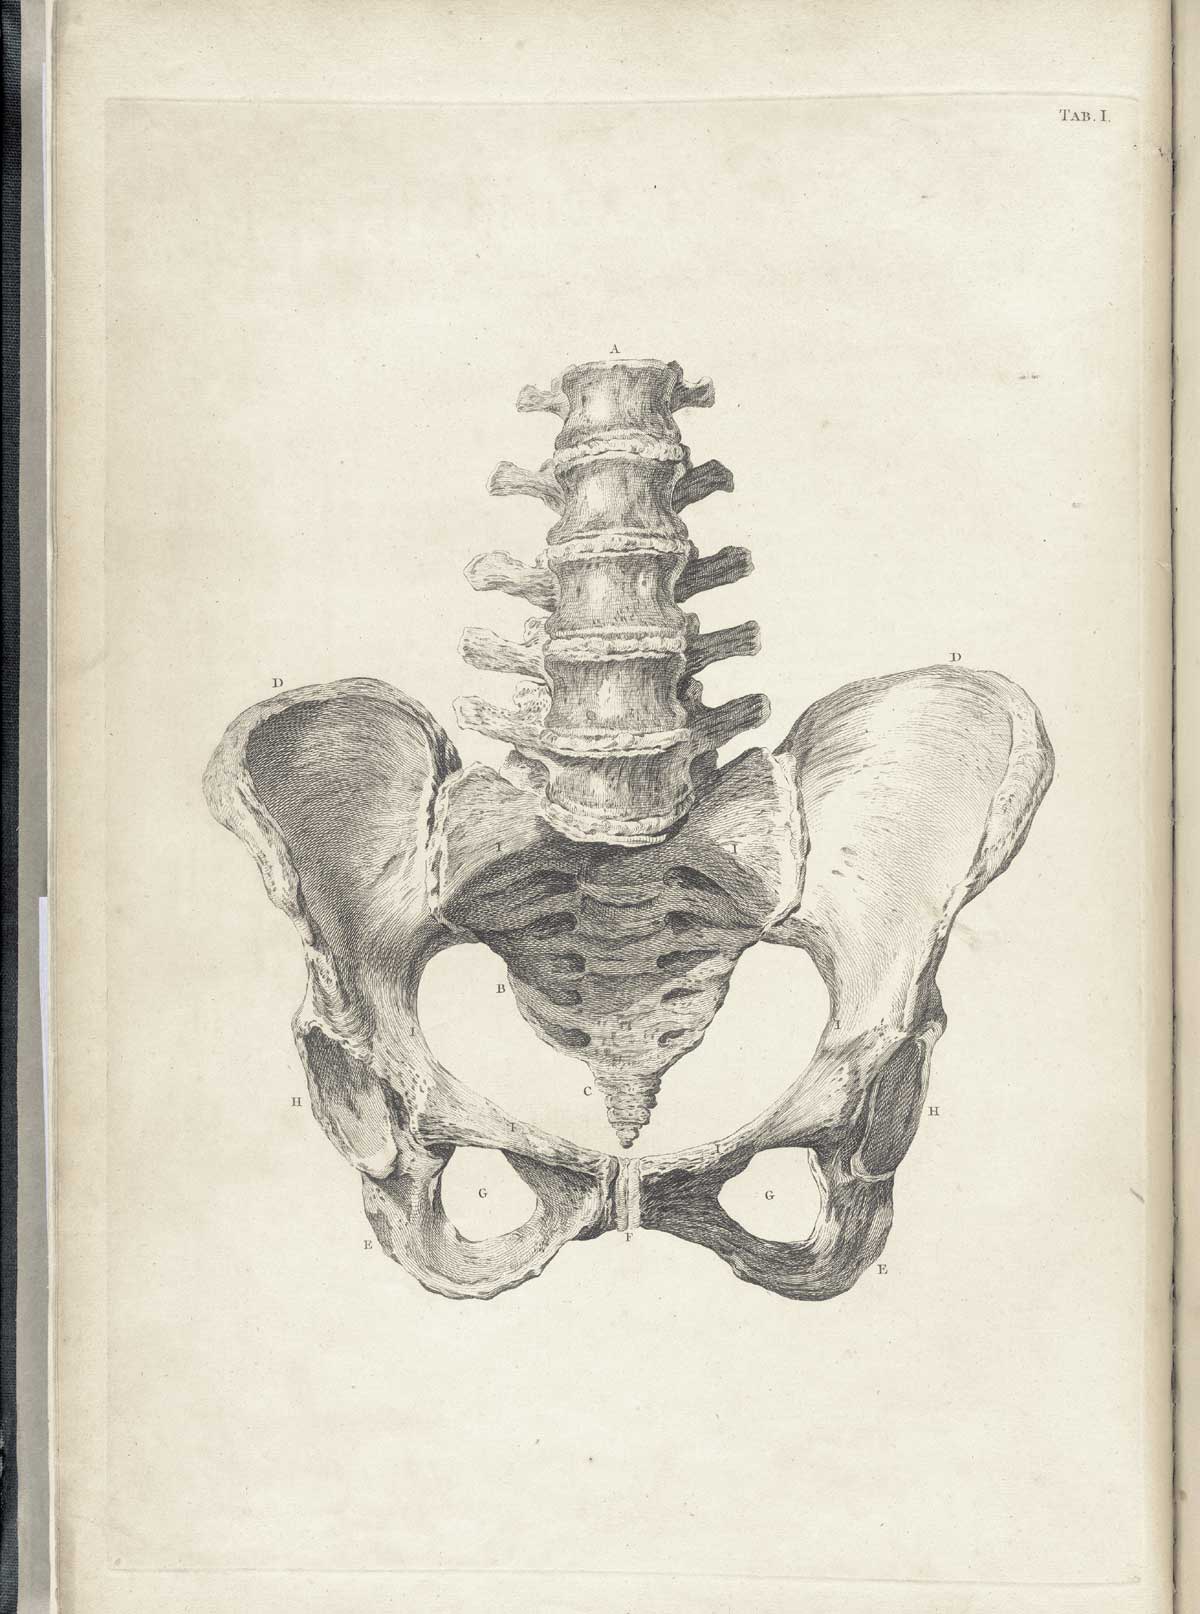 Table 1 of William Smellie's A sett of anatomical tables, with explanations, and an abridgment, of the practice of midwifery, featuring the illustrated drawing of the lower spine and pelvis.